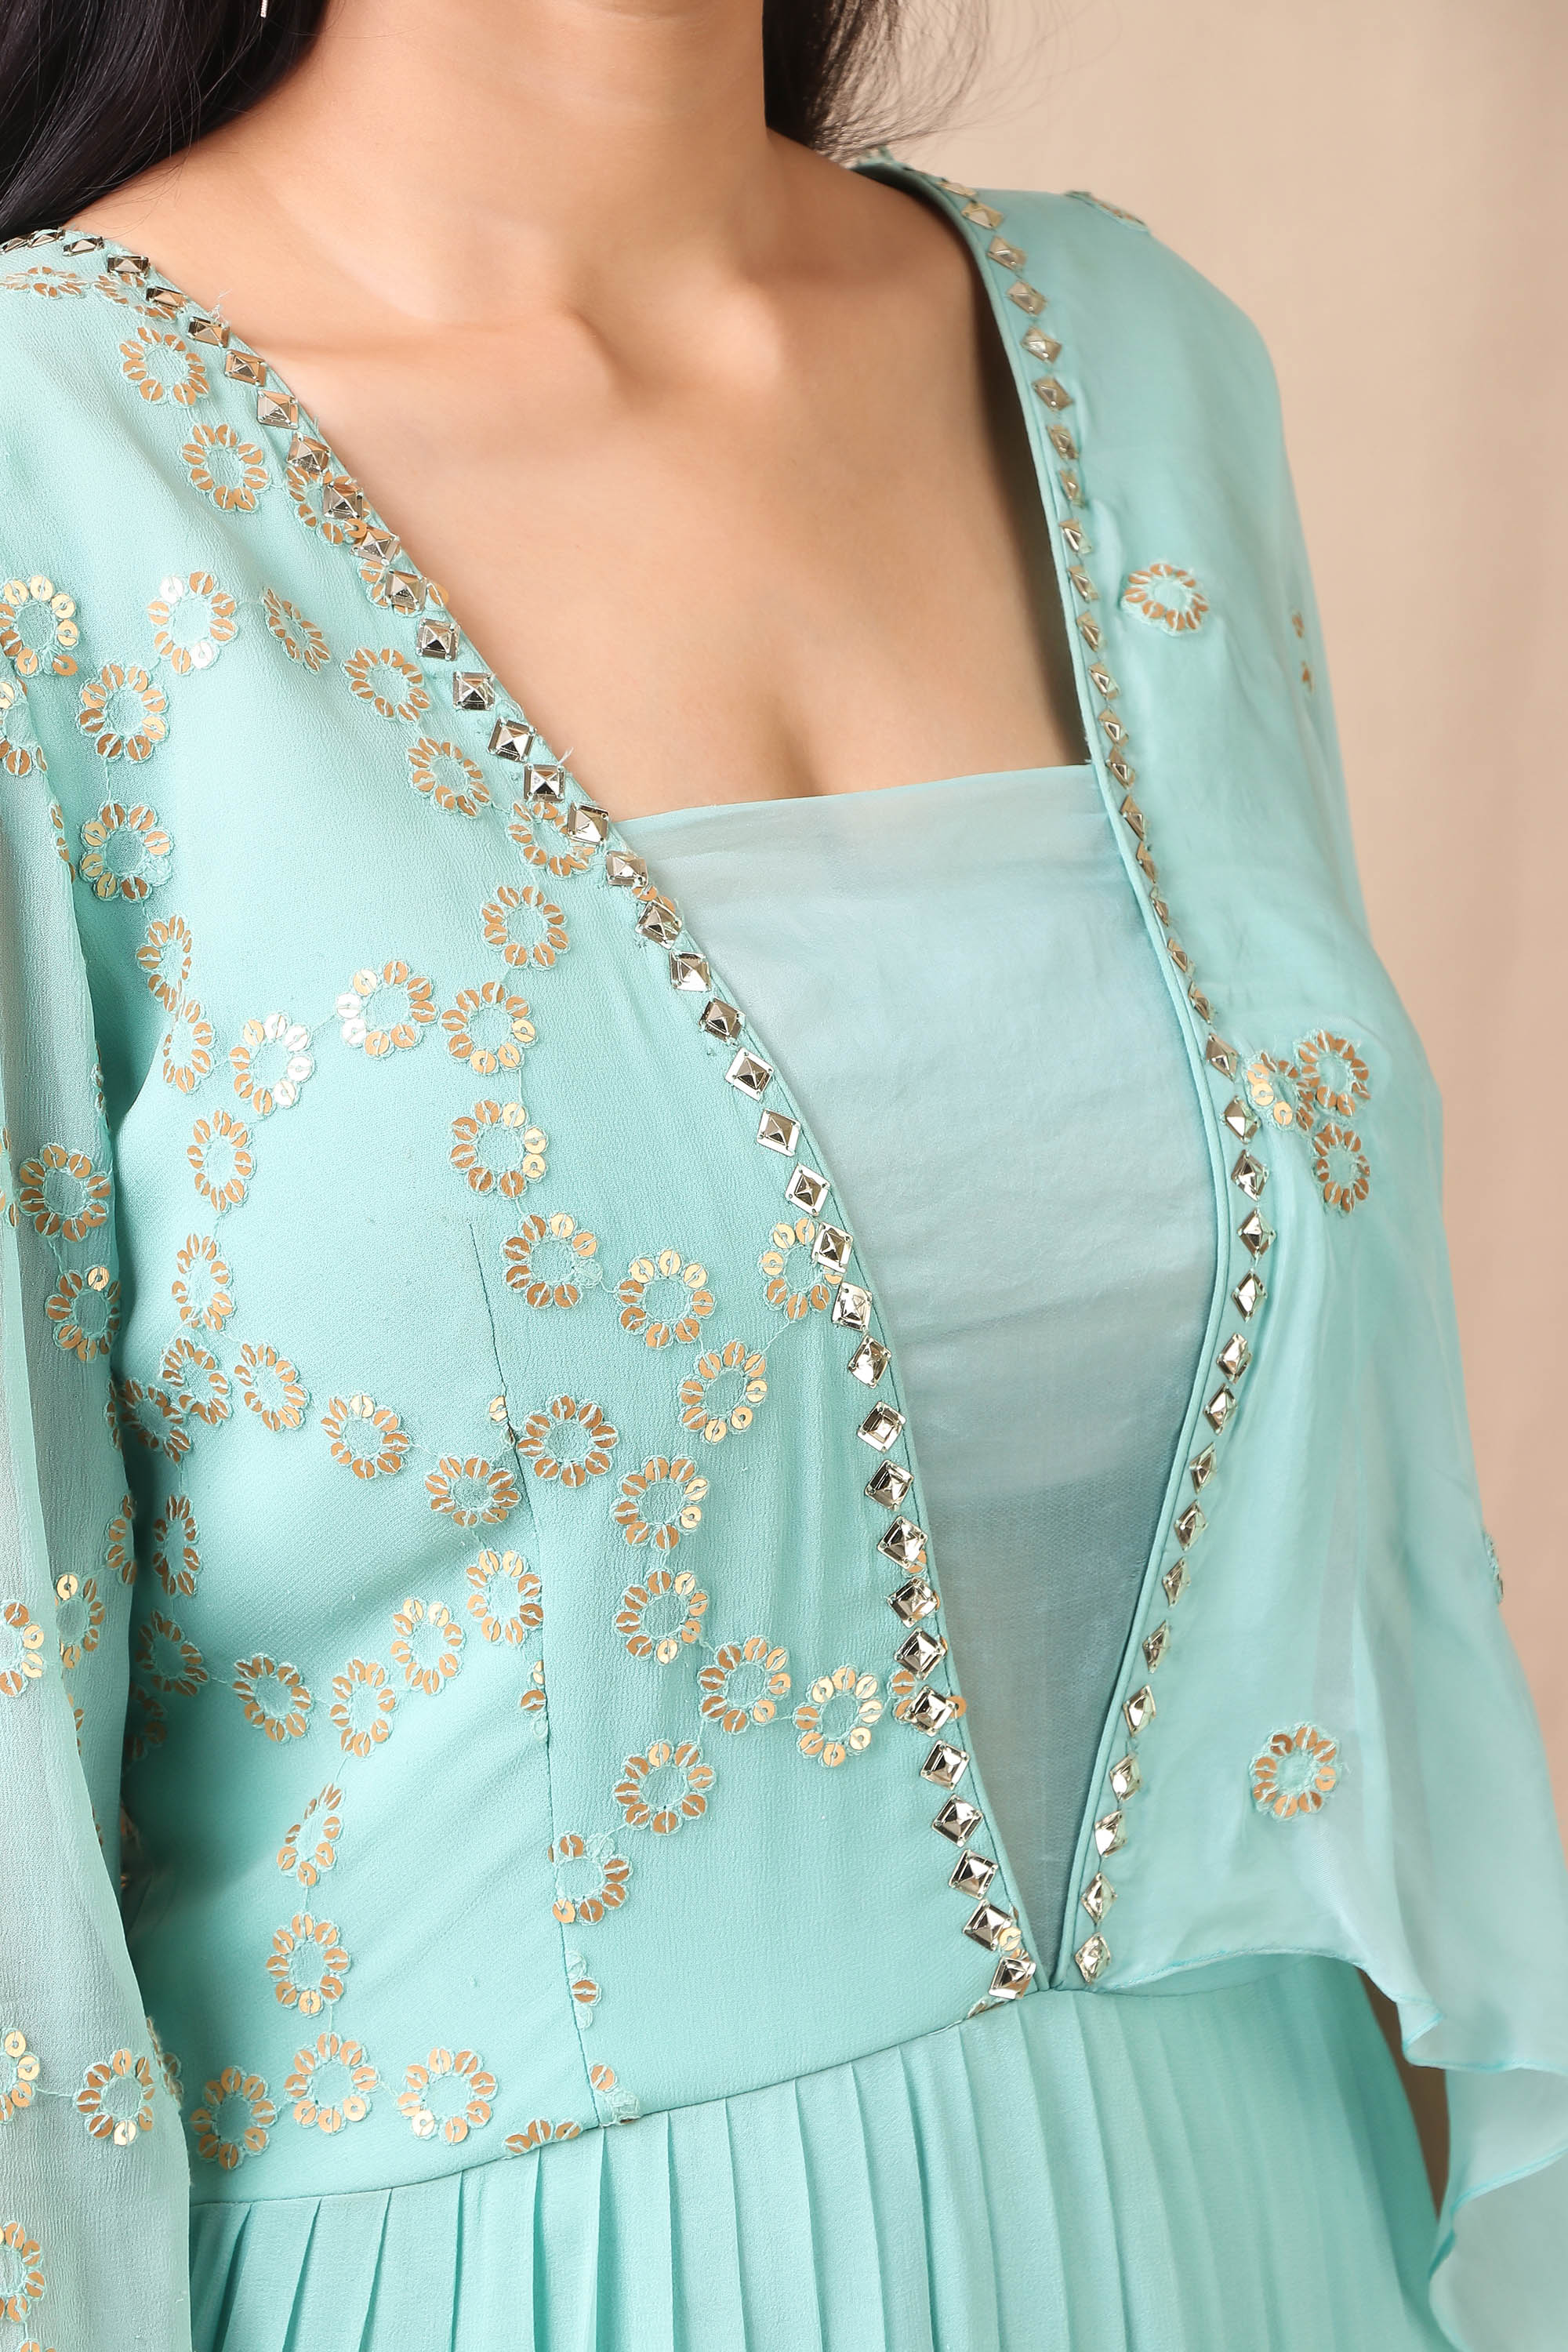 Shop gorgeous teal blue anarkali suit online in USA with thread embroidery and dupatta. Get festive ready in beautiful designer Anarkali suits, designer lehenga, wedding gowns, sharara suits, designer sarees from Pure Elegance Indian fashion store in USA.-Neck view.